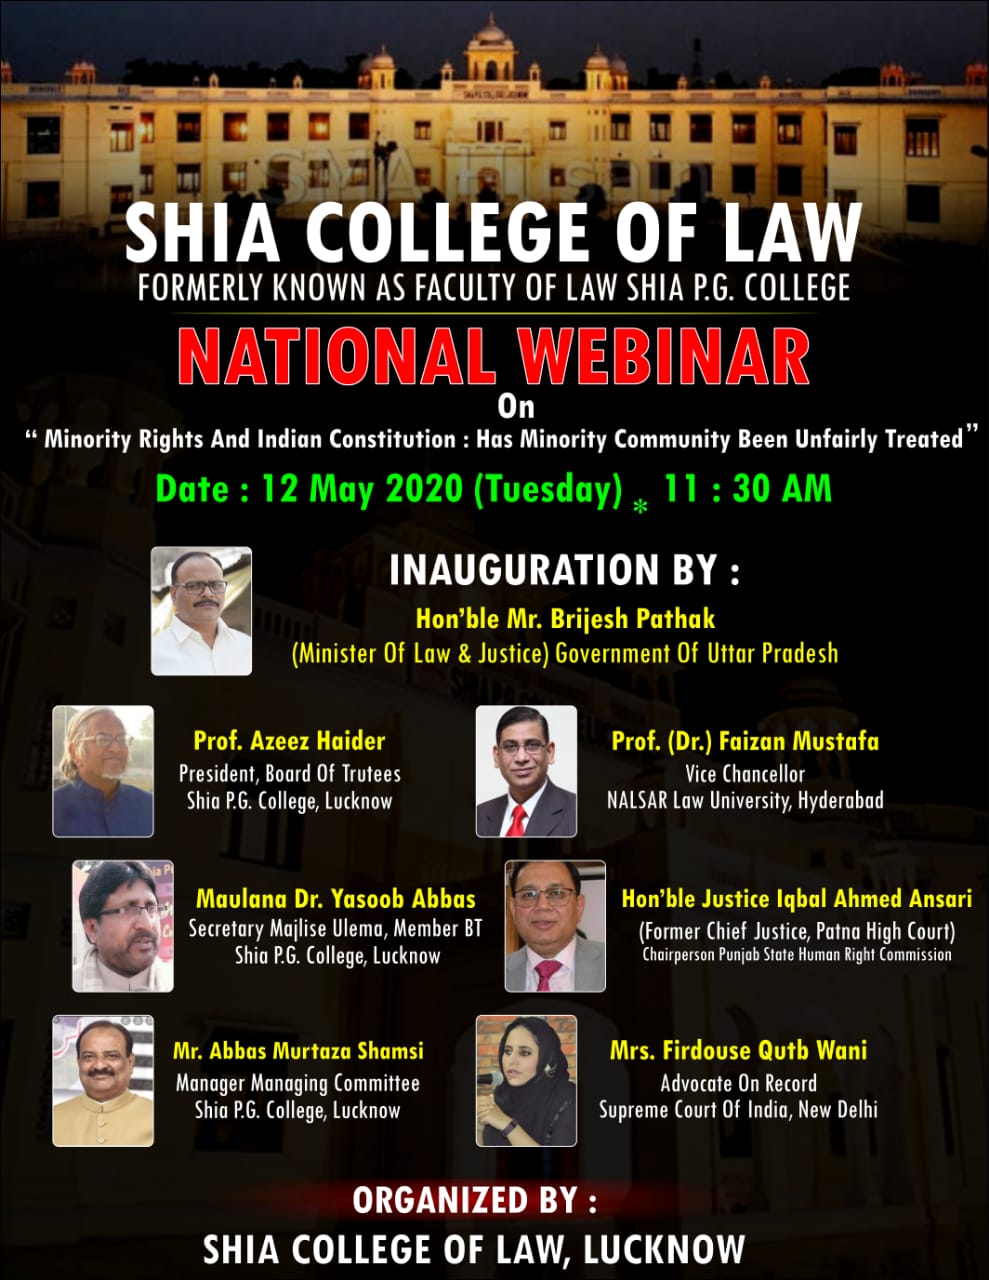 National Webinar on "Minority rights and Indian Constitution"